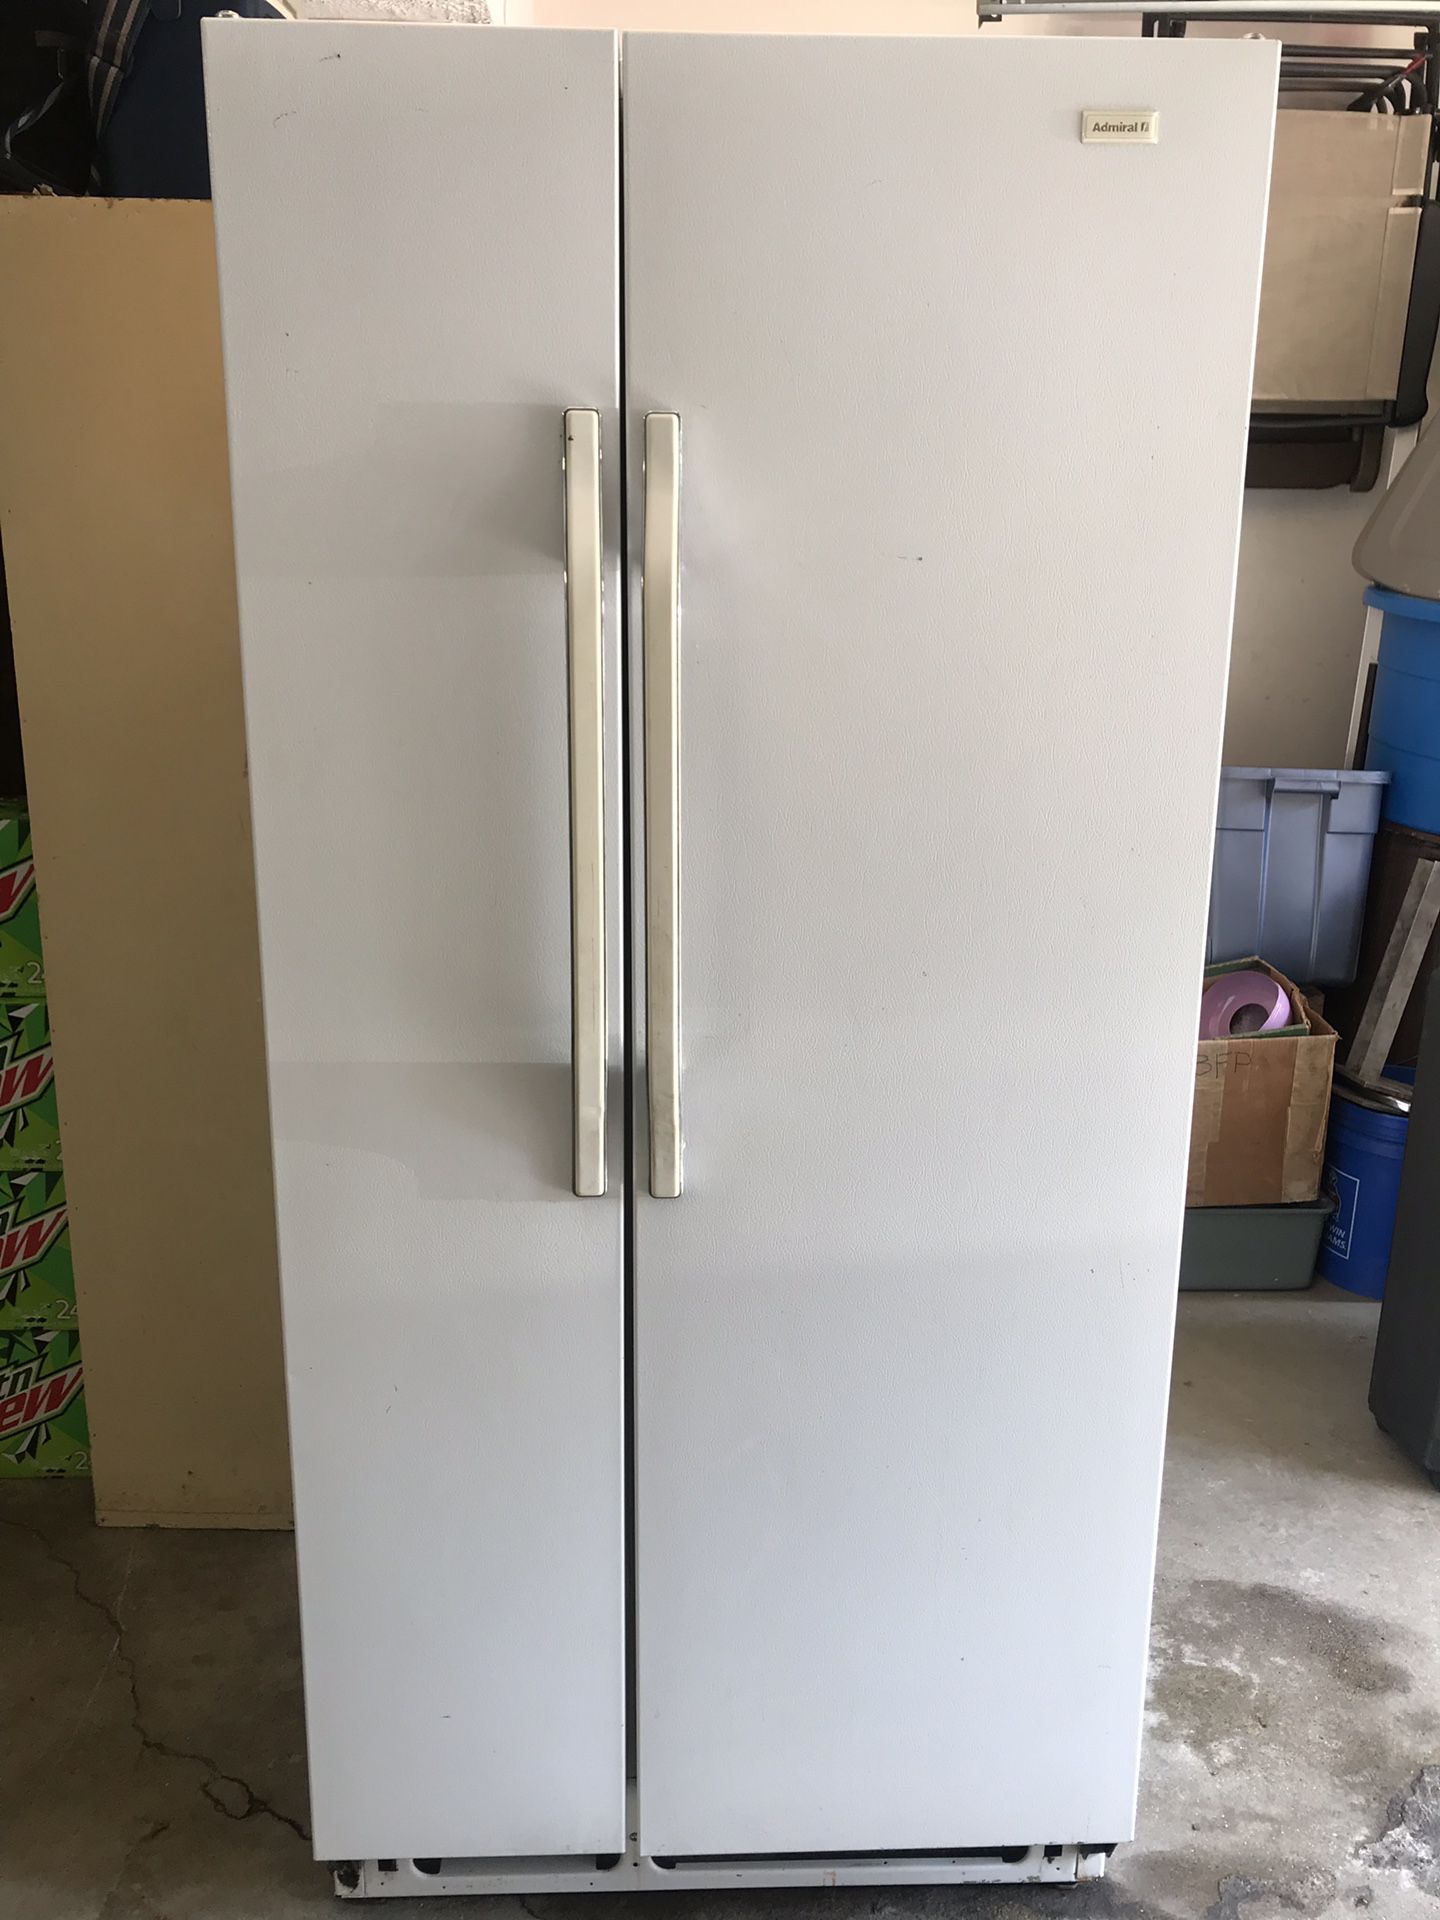 Admiral side by side Refrigerator and Freezer